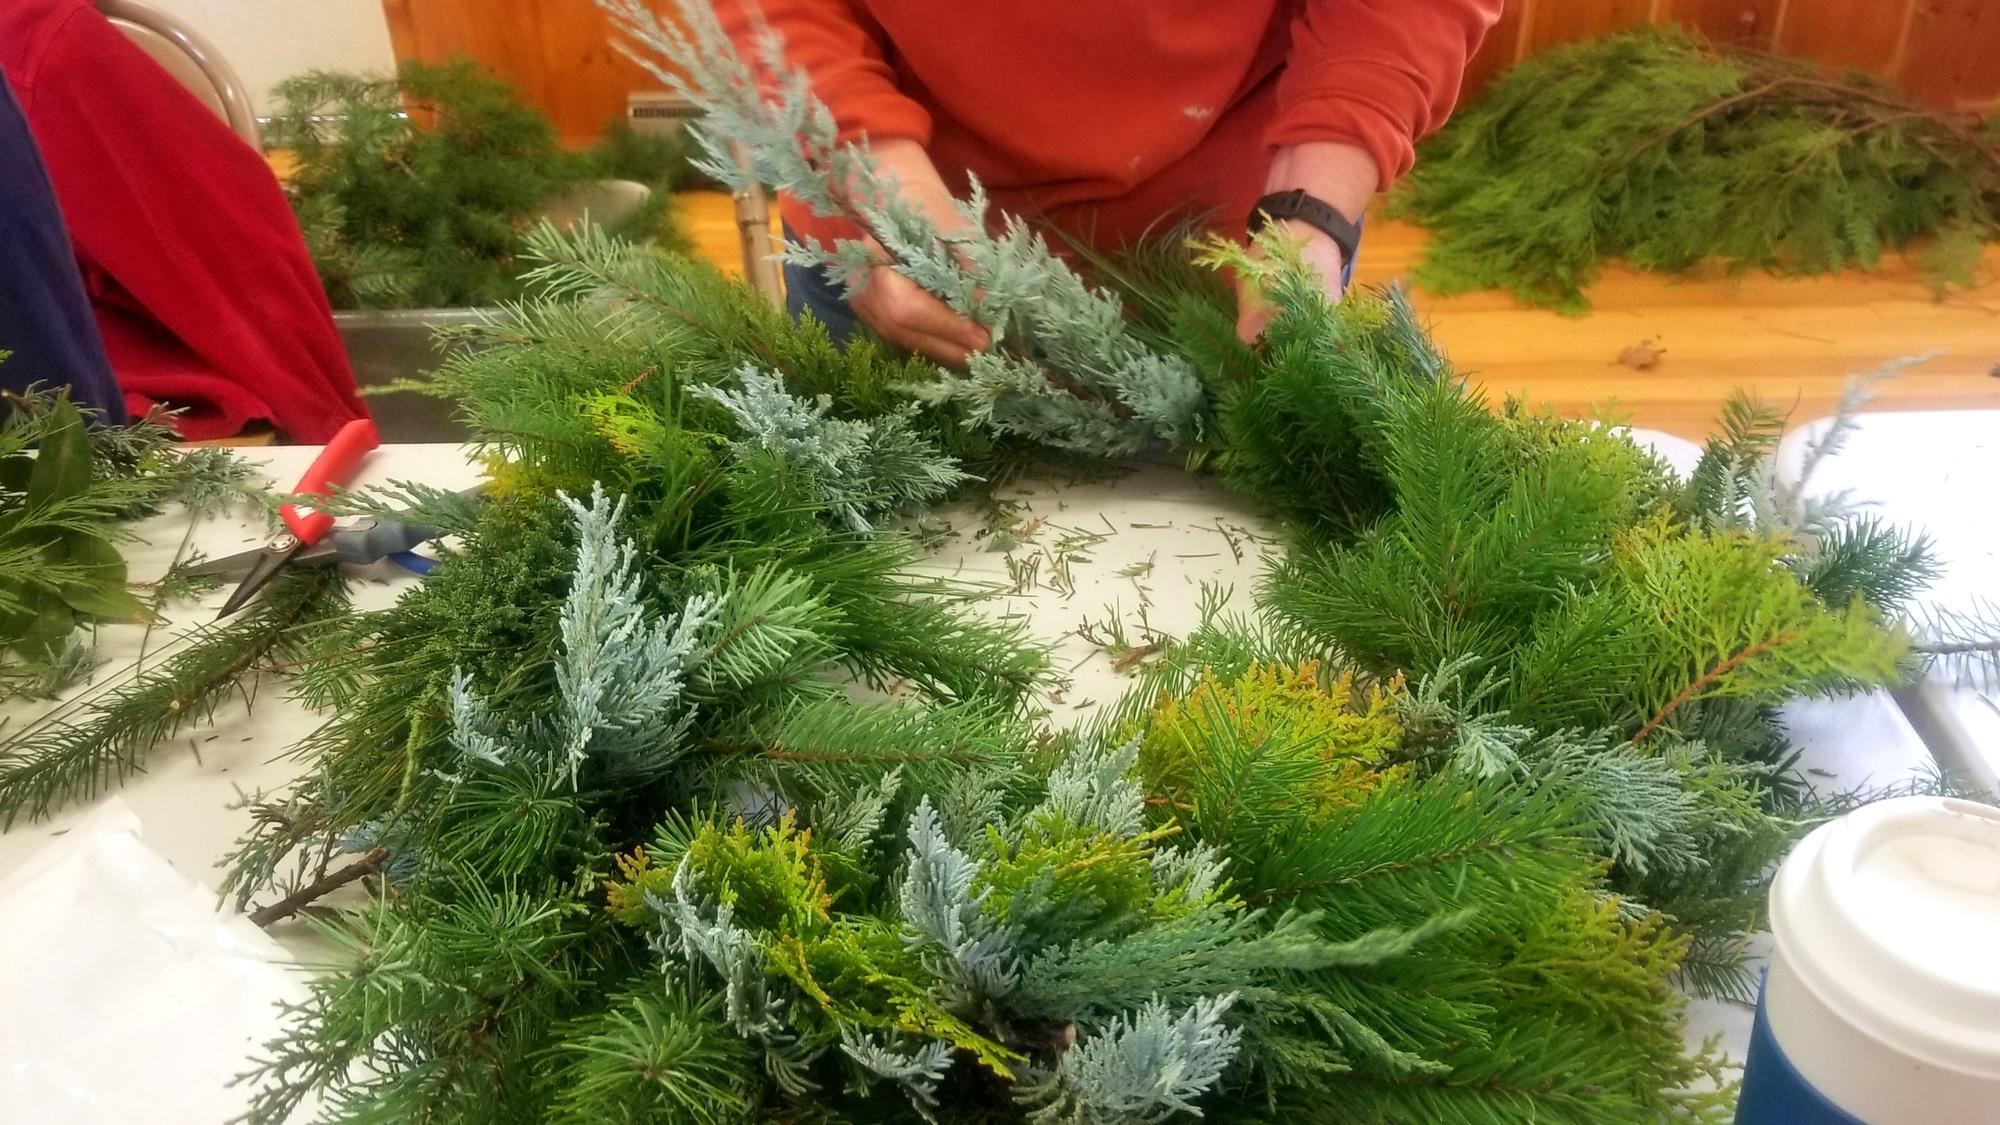 Making a wreath out of evergreen boughs